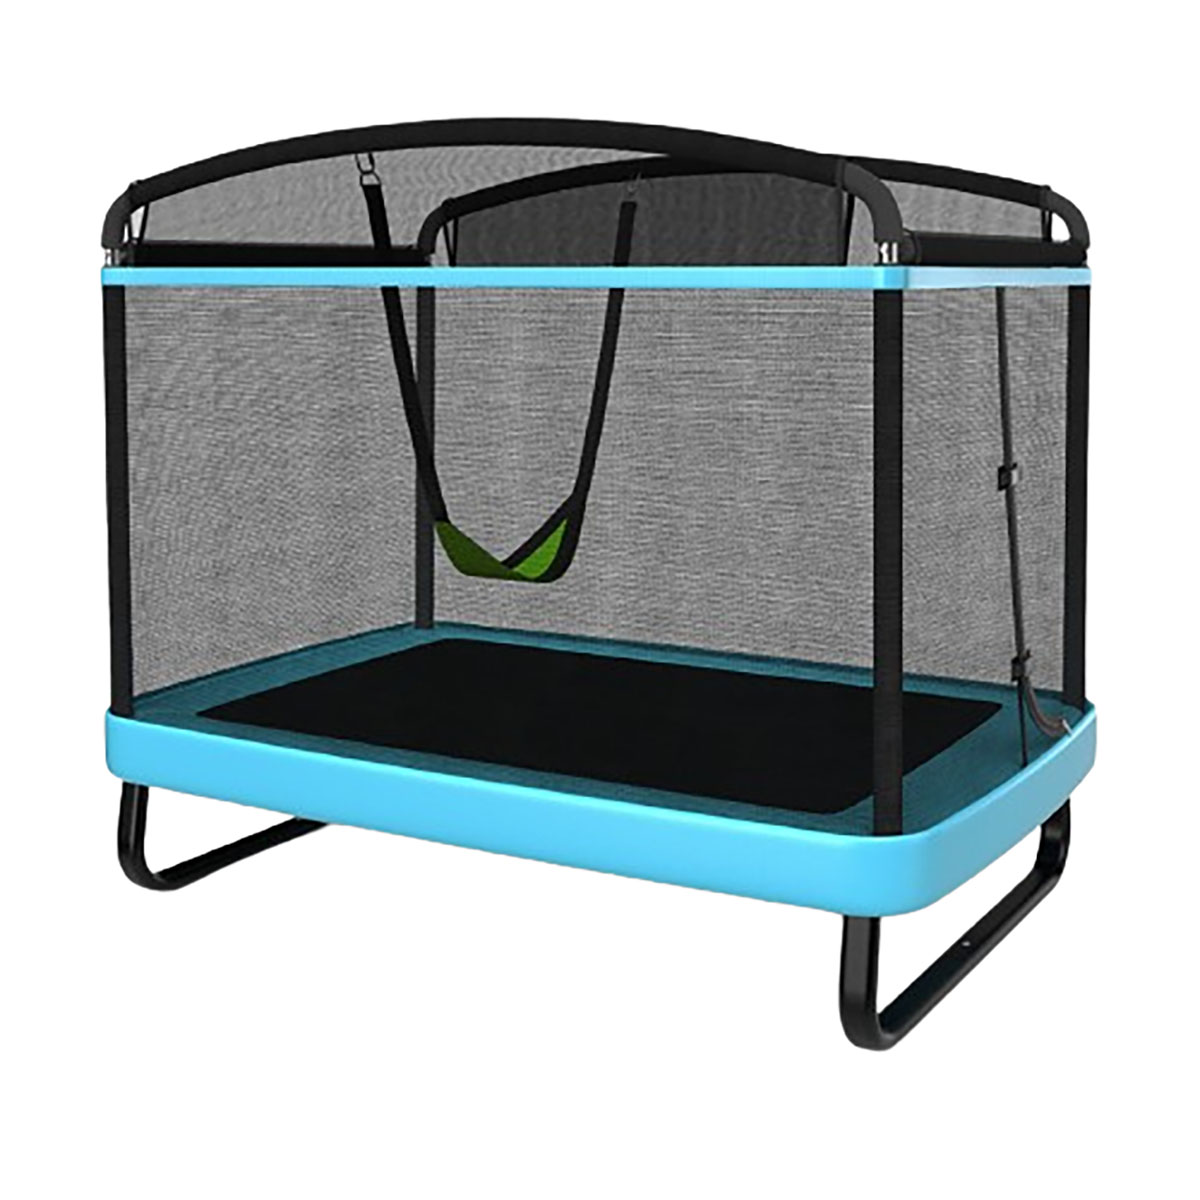 Photos - Trampoline Costway Kids' 6-Foot  with Swing Safety Fence -  Blue 